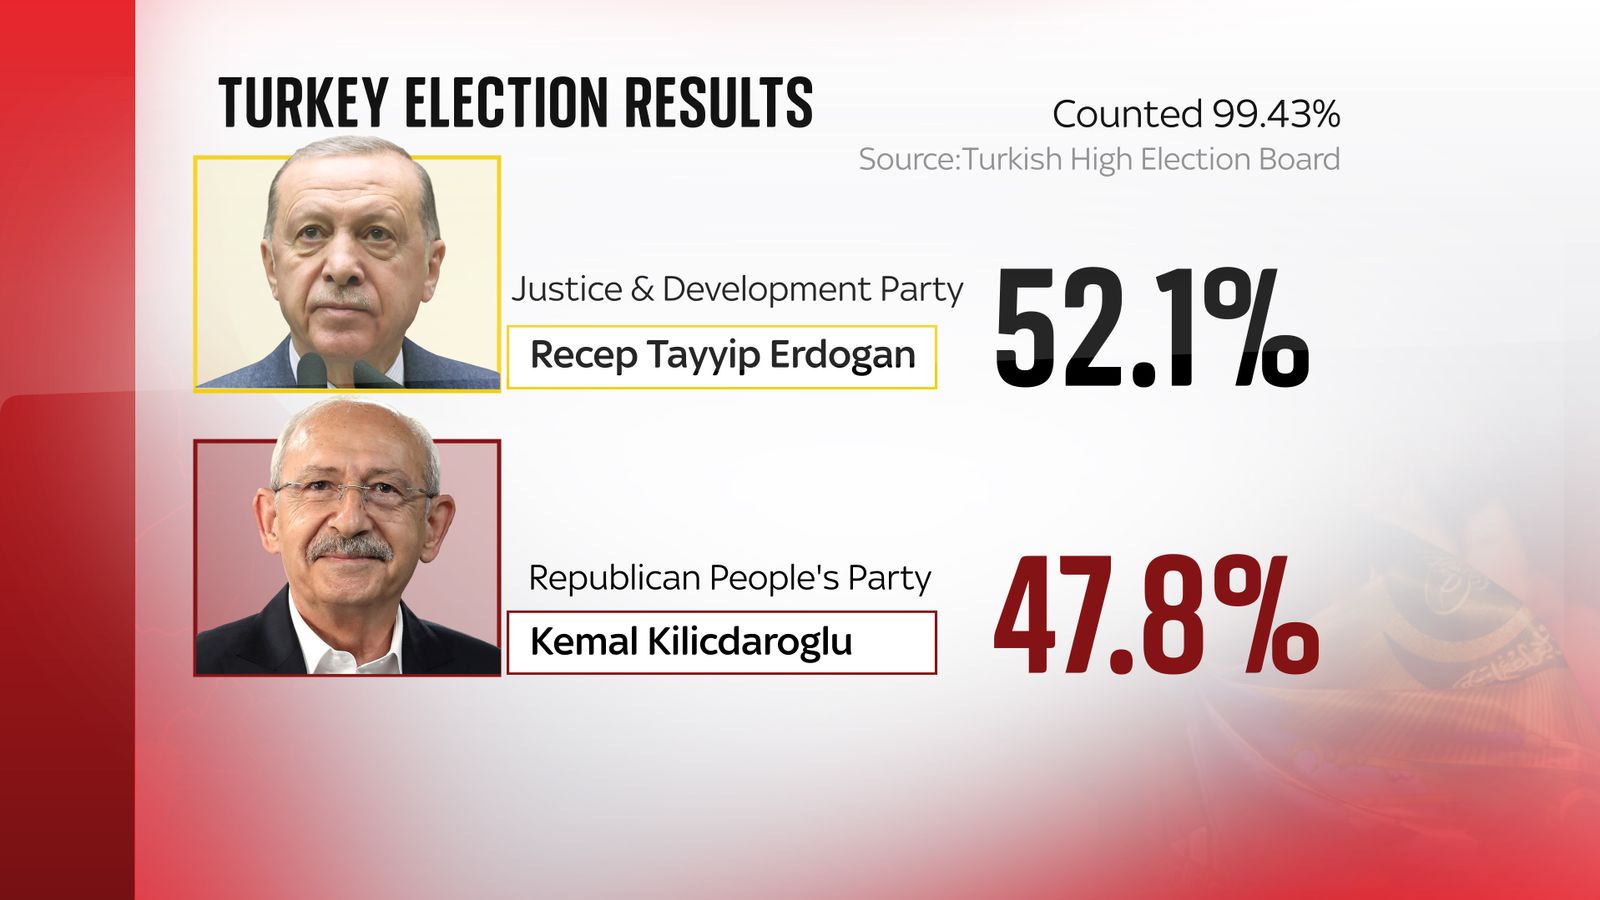 Erdogan was elected president of Turkey after garnering more than 52% of the vote